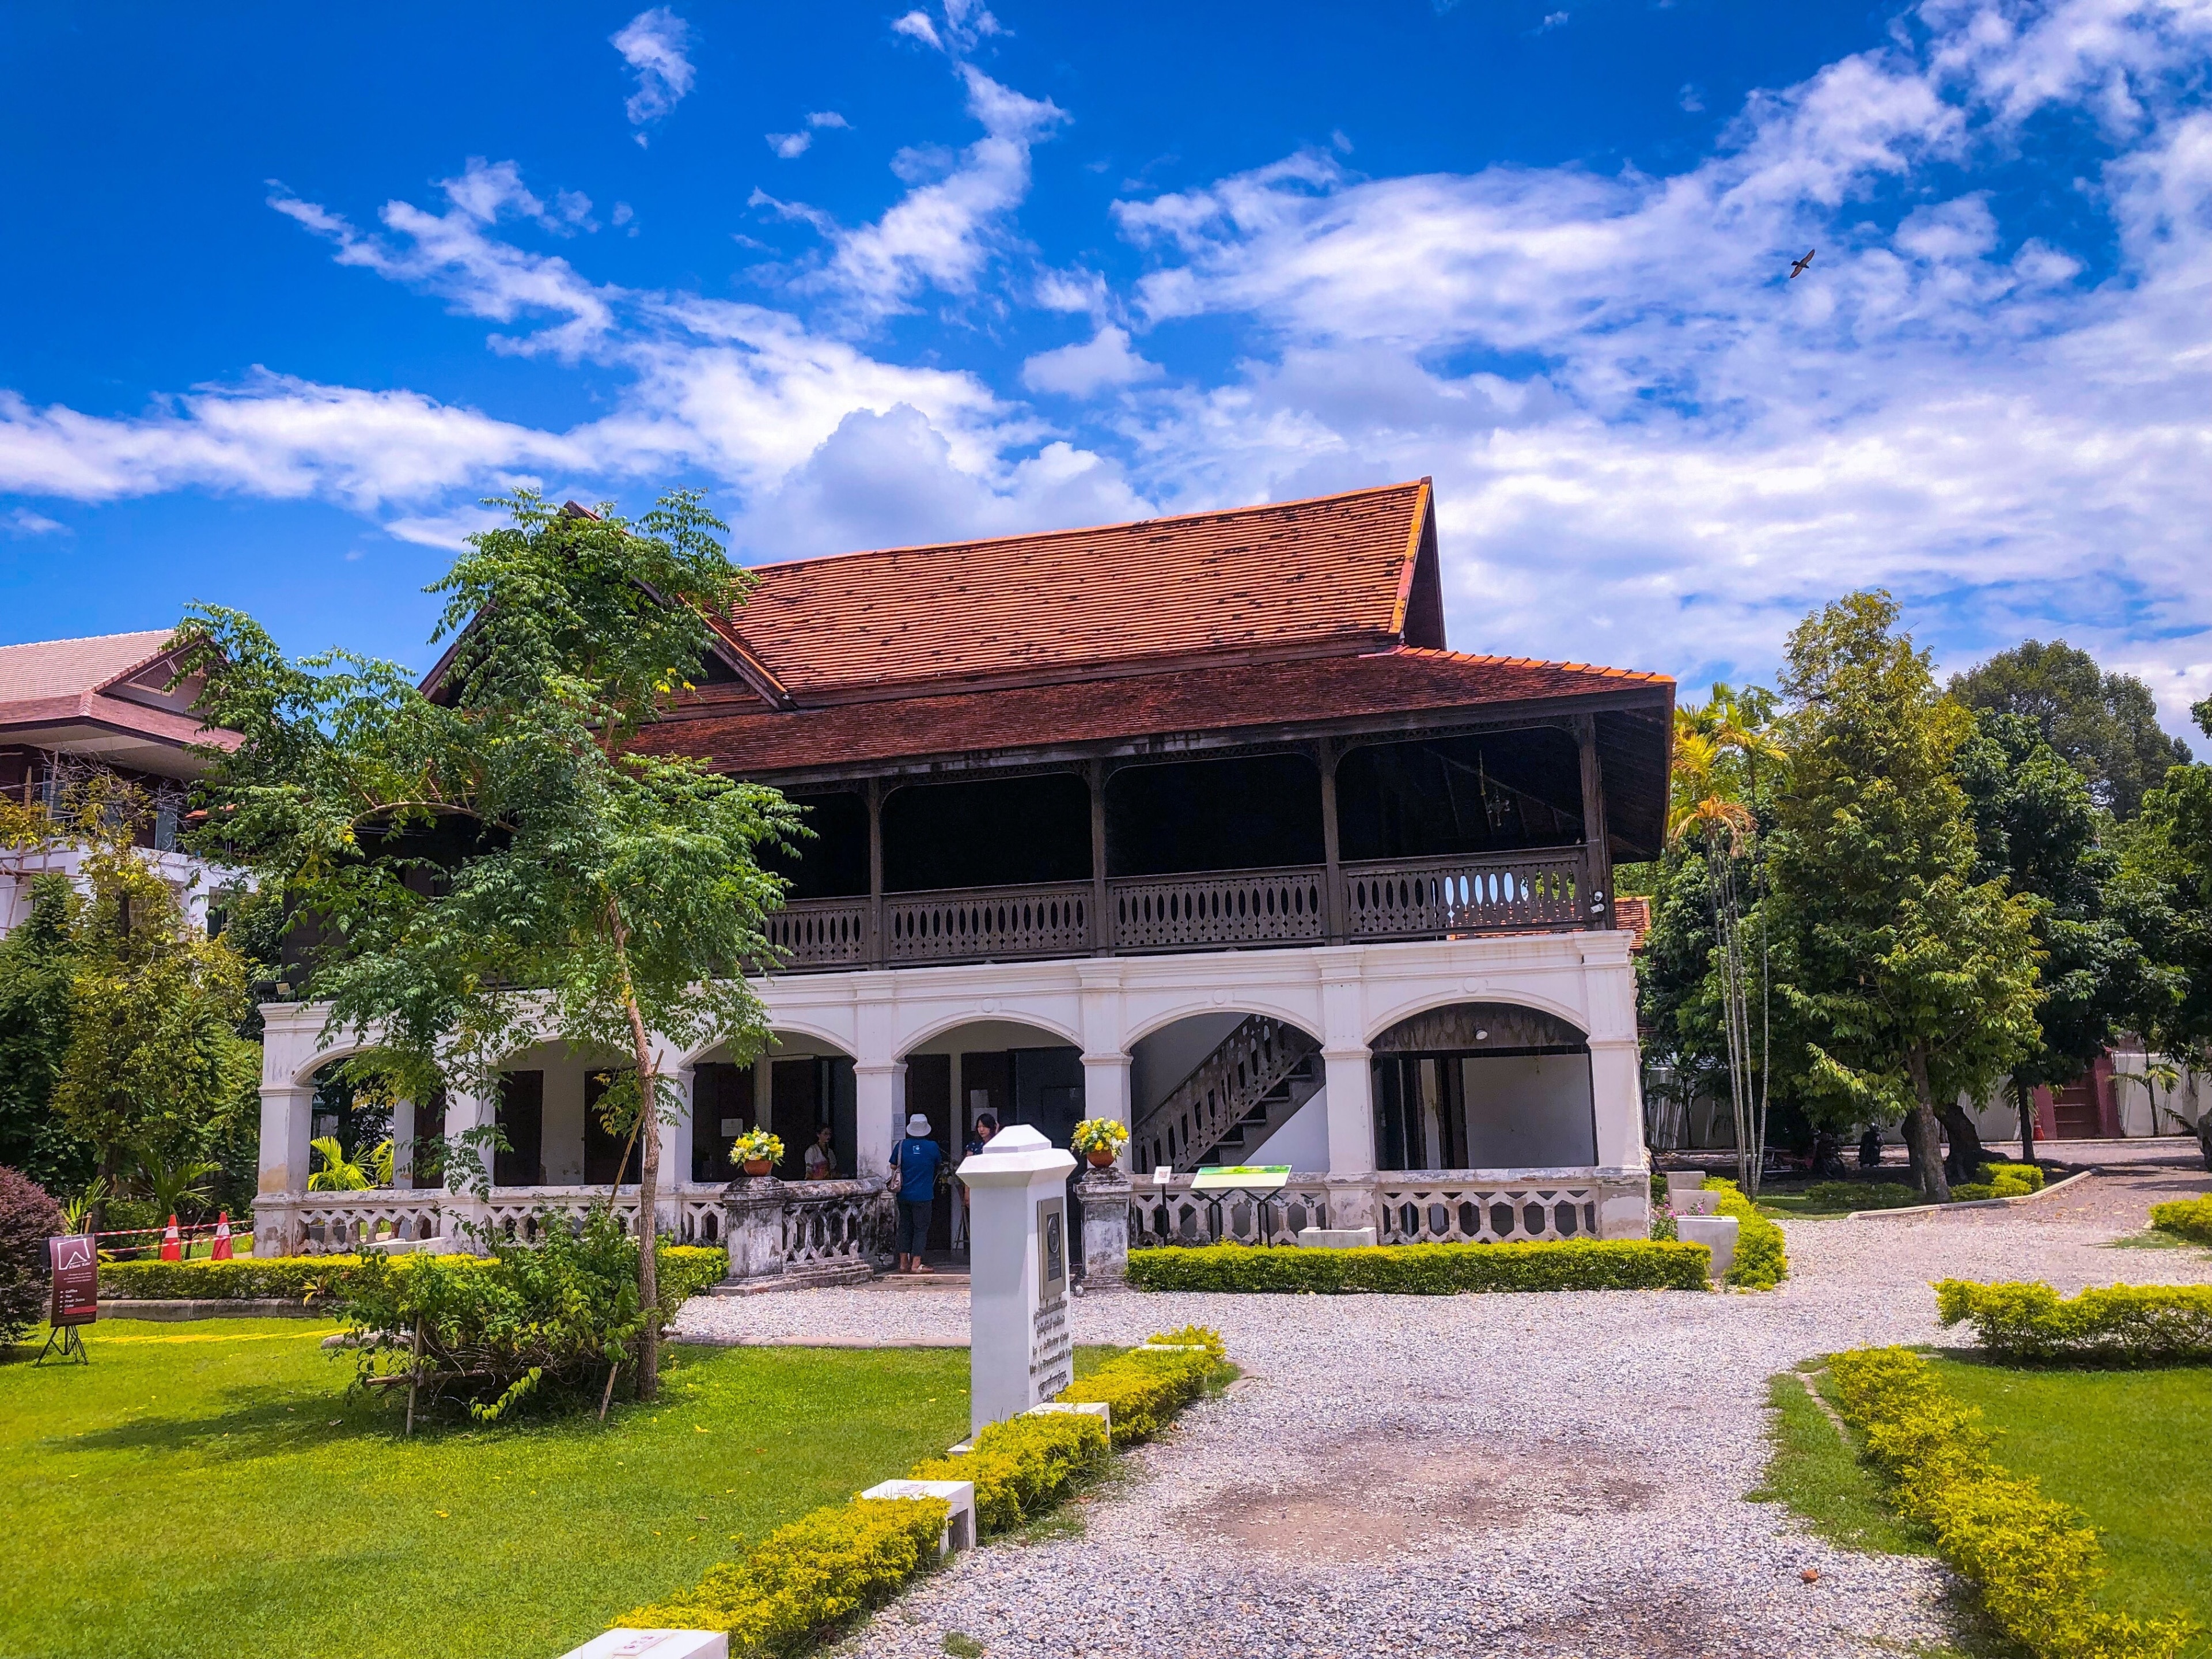 Lanna Architecture Center, Chiang Mai, Chiang Mai Province, Thailand